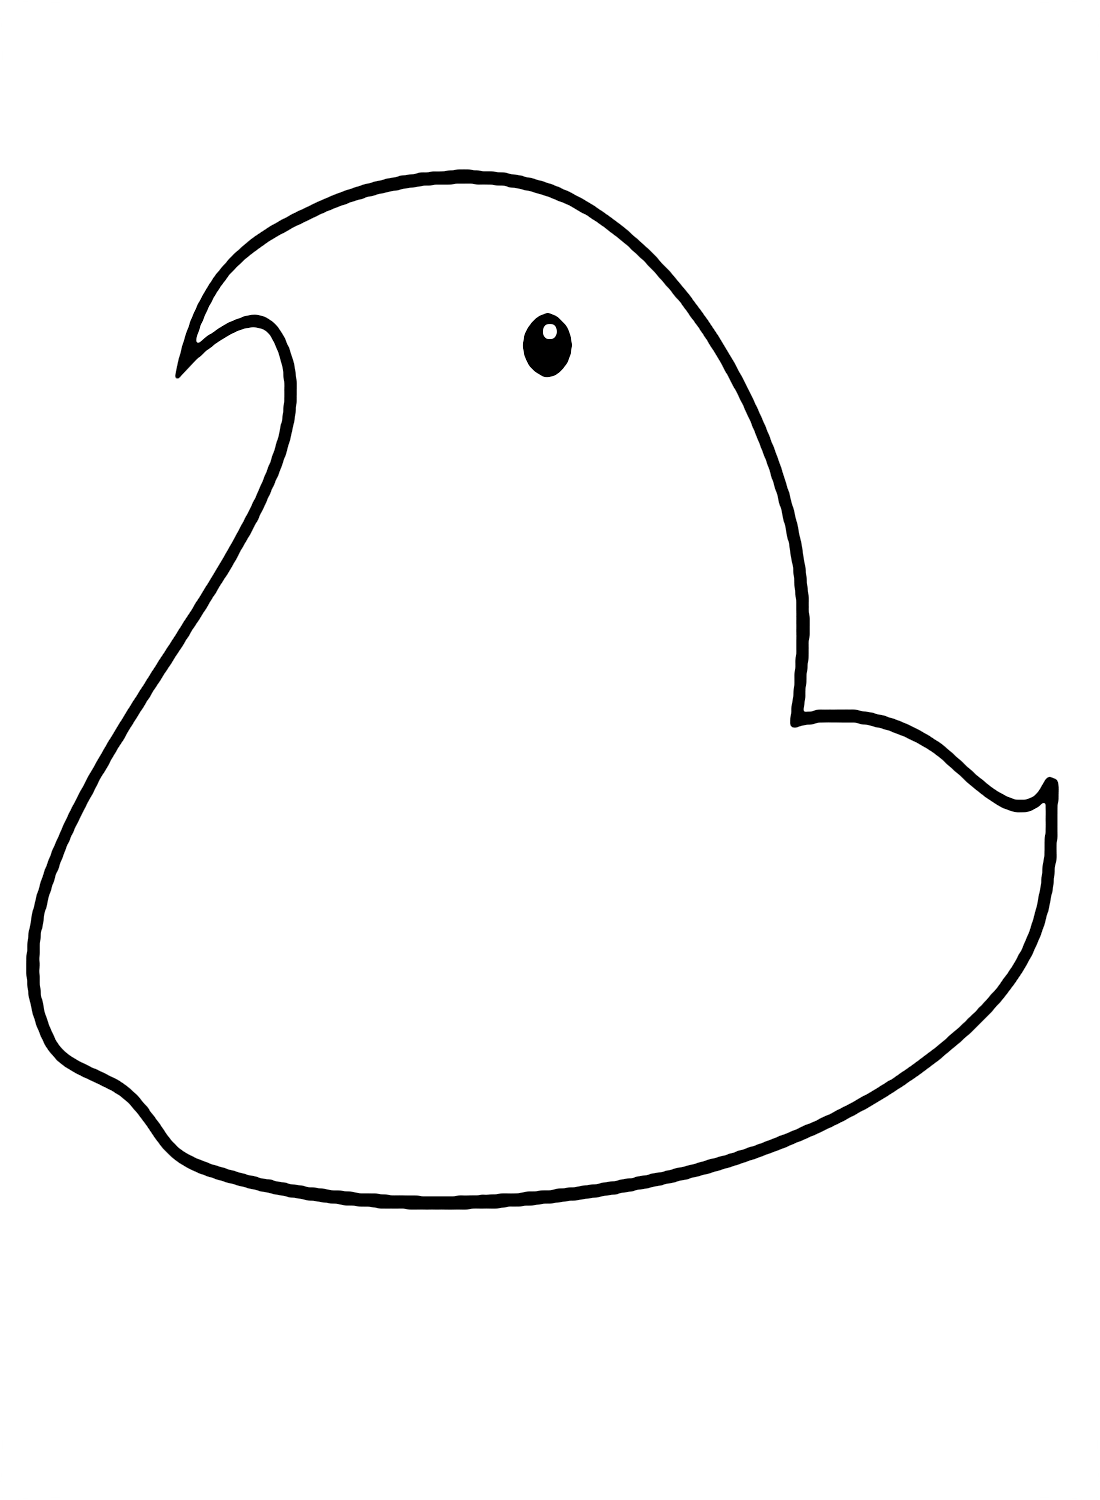 Marshmallow Peeps Chick Coloring Pages